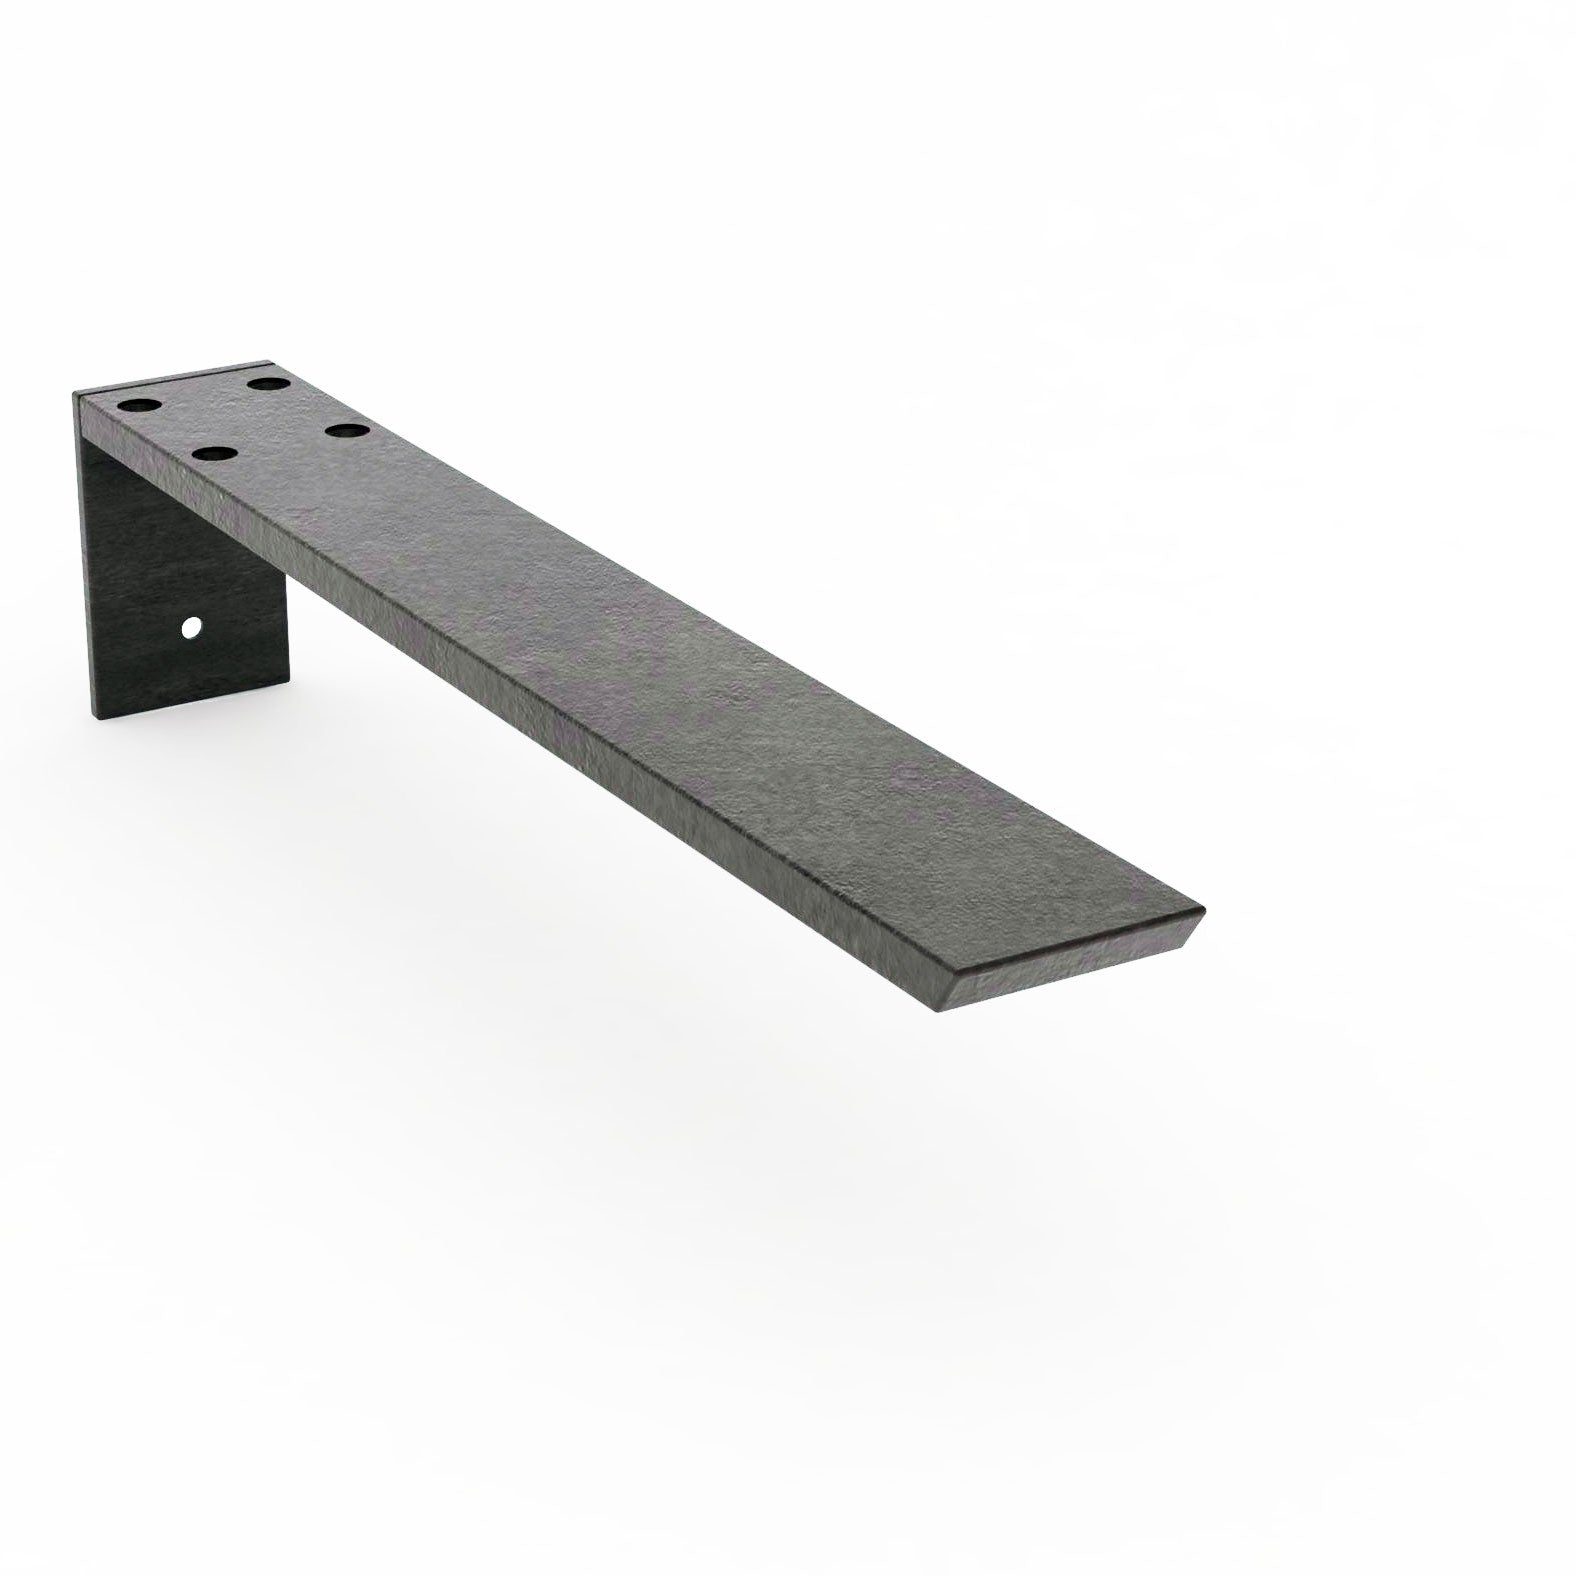 Hidden Granite Countertop L Bracket - 18" Raw. Sturdy support for kitchen islands and pony walls.